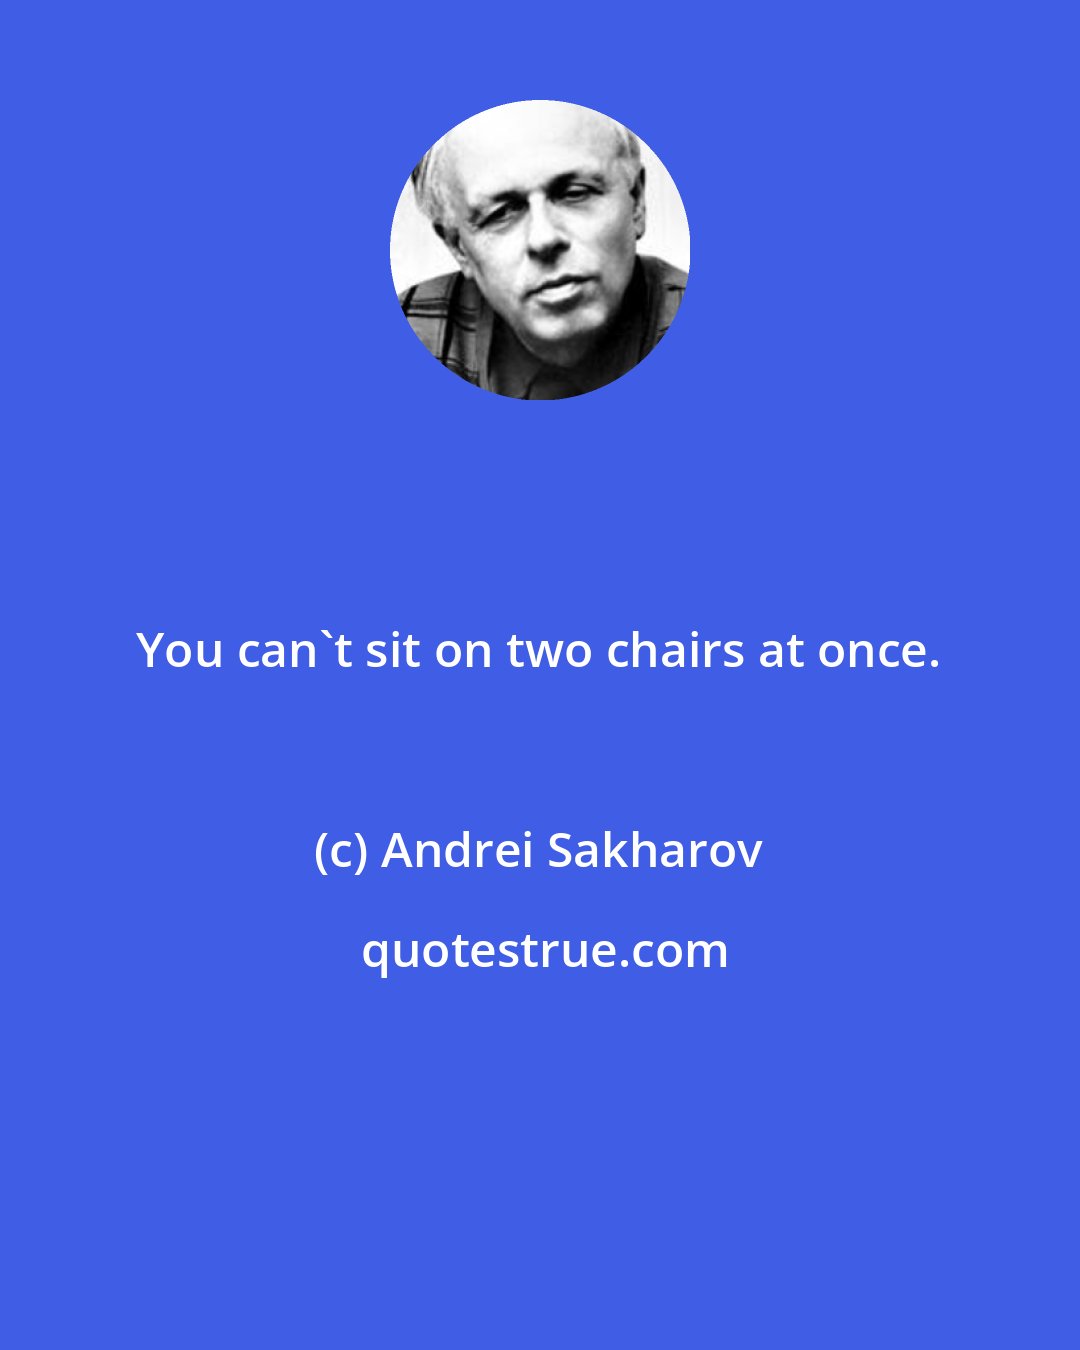 Andrei Sakharov: You can't sit on two chairs at once.